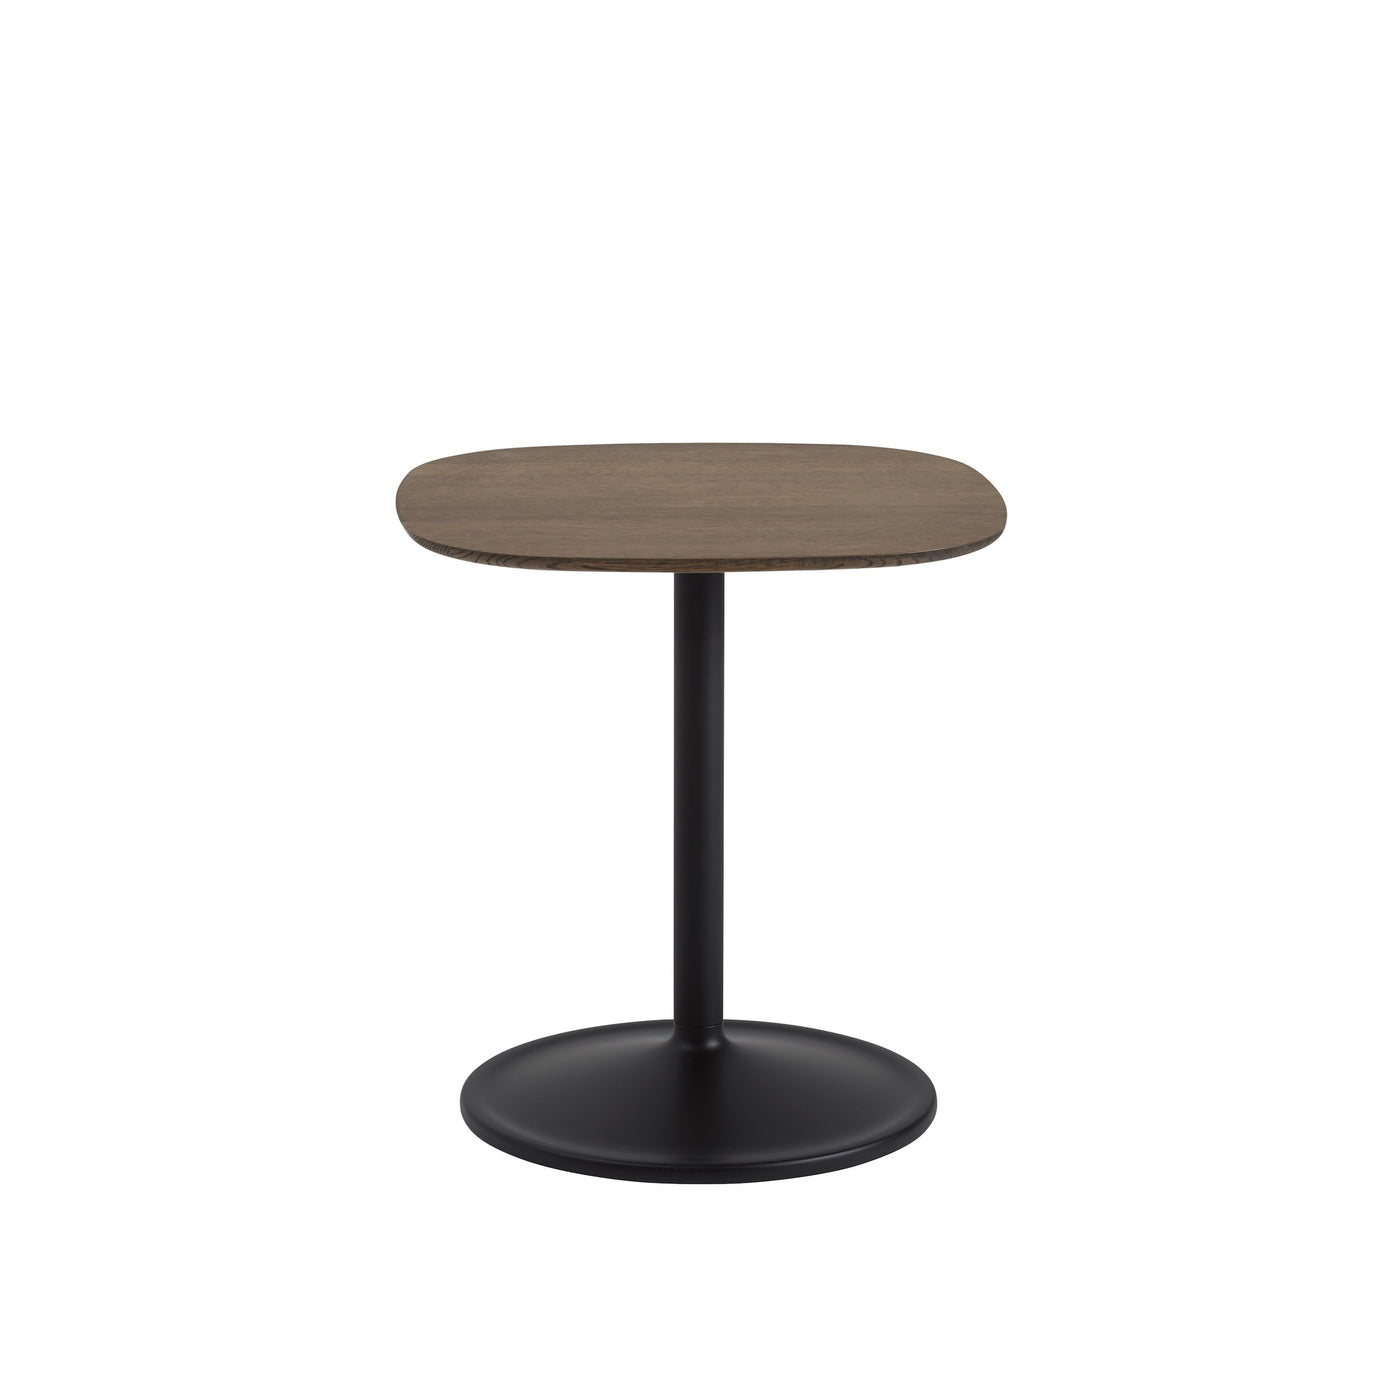 Muuto Soft side table Ø45 x 48cm high. Shop online at someday designs. #colour_solid-smoked-oak-black